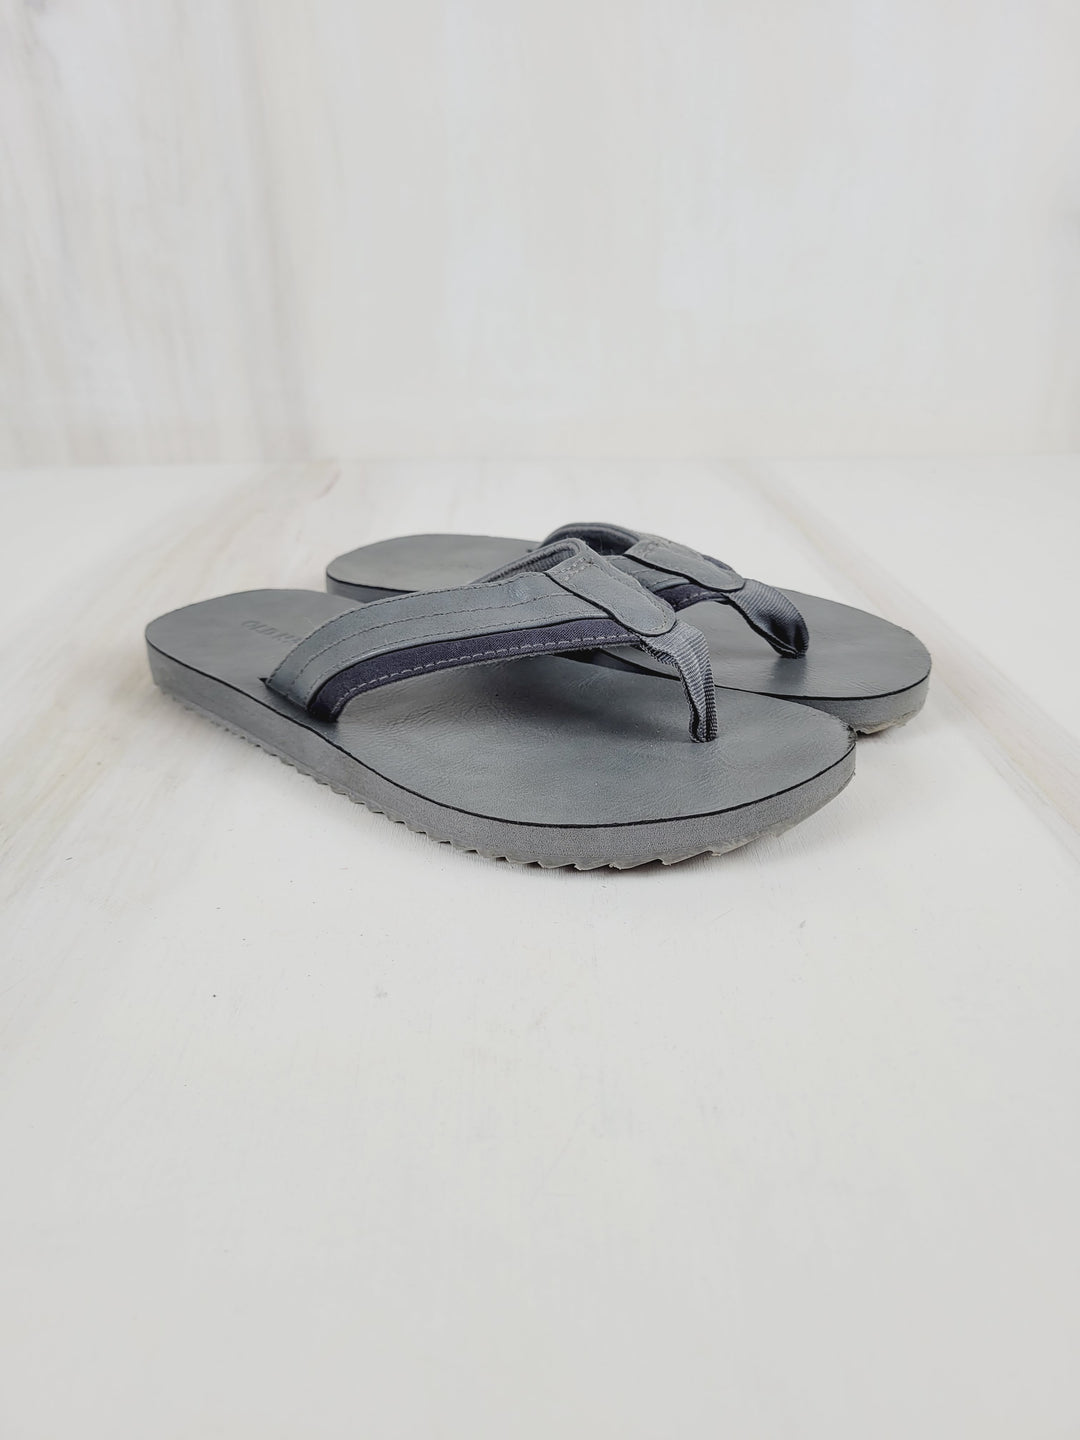 OLD NAVY  GREY SANDALS SIZE 1/2 YOUTH VGUC/EUC